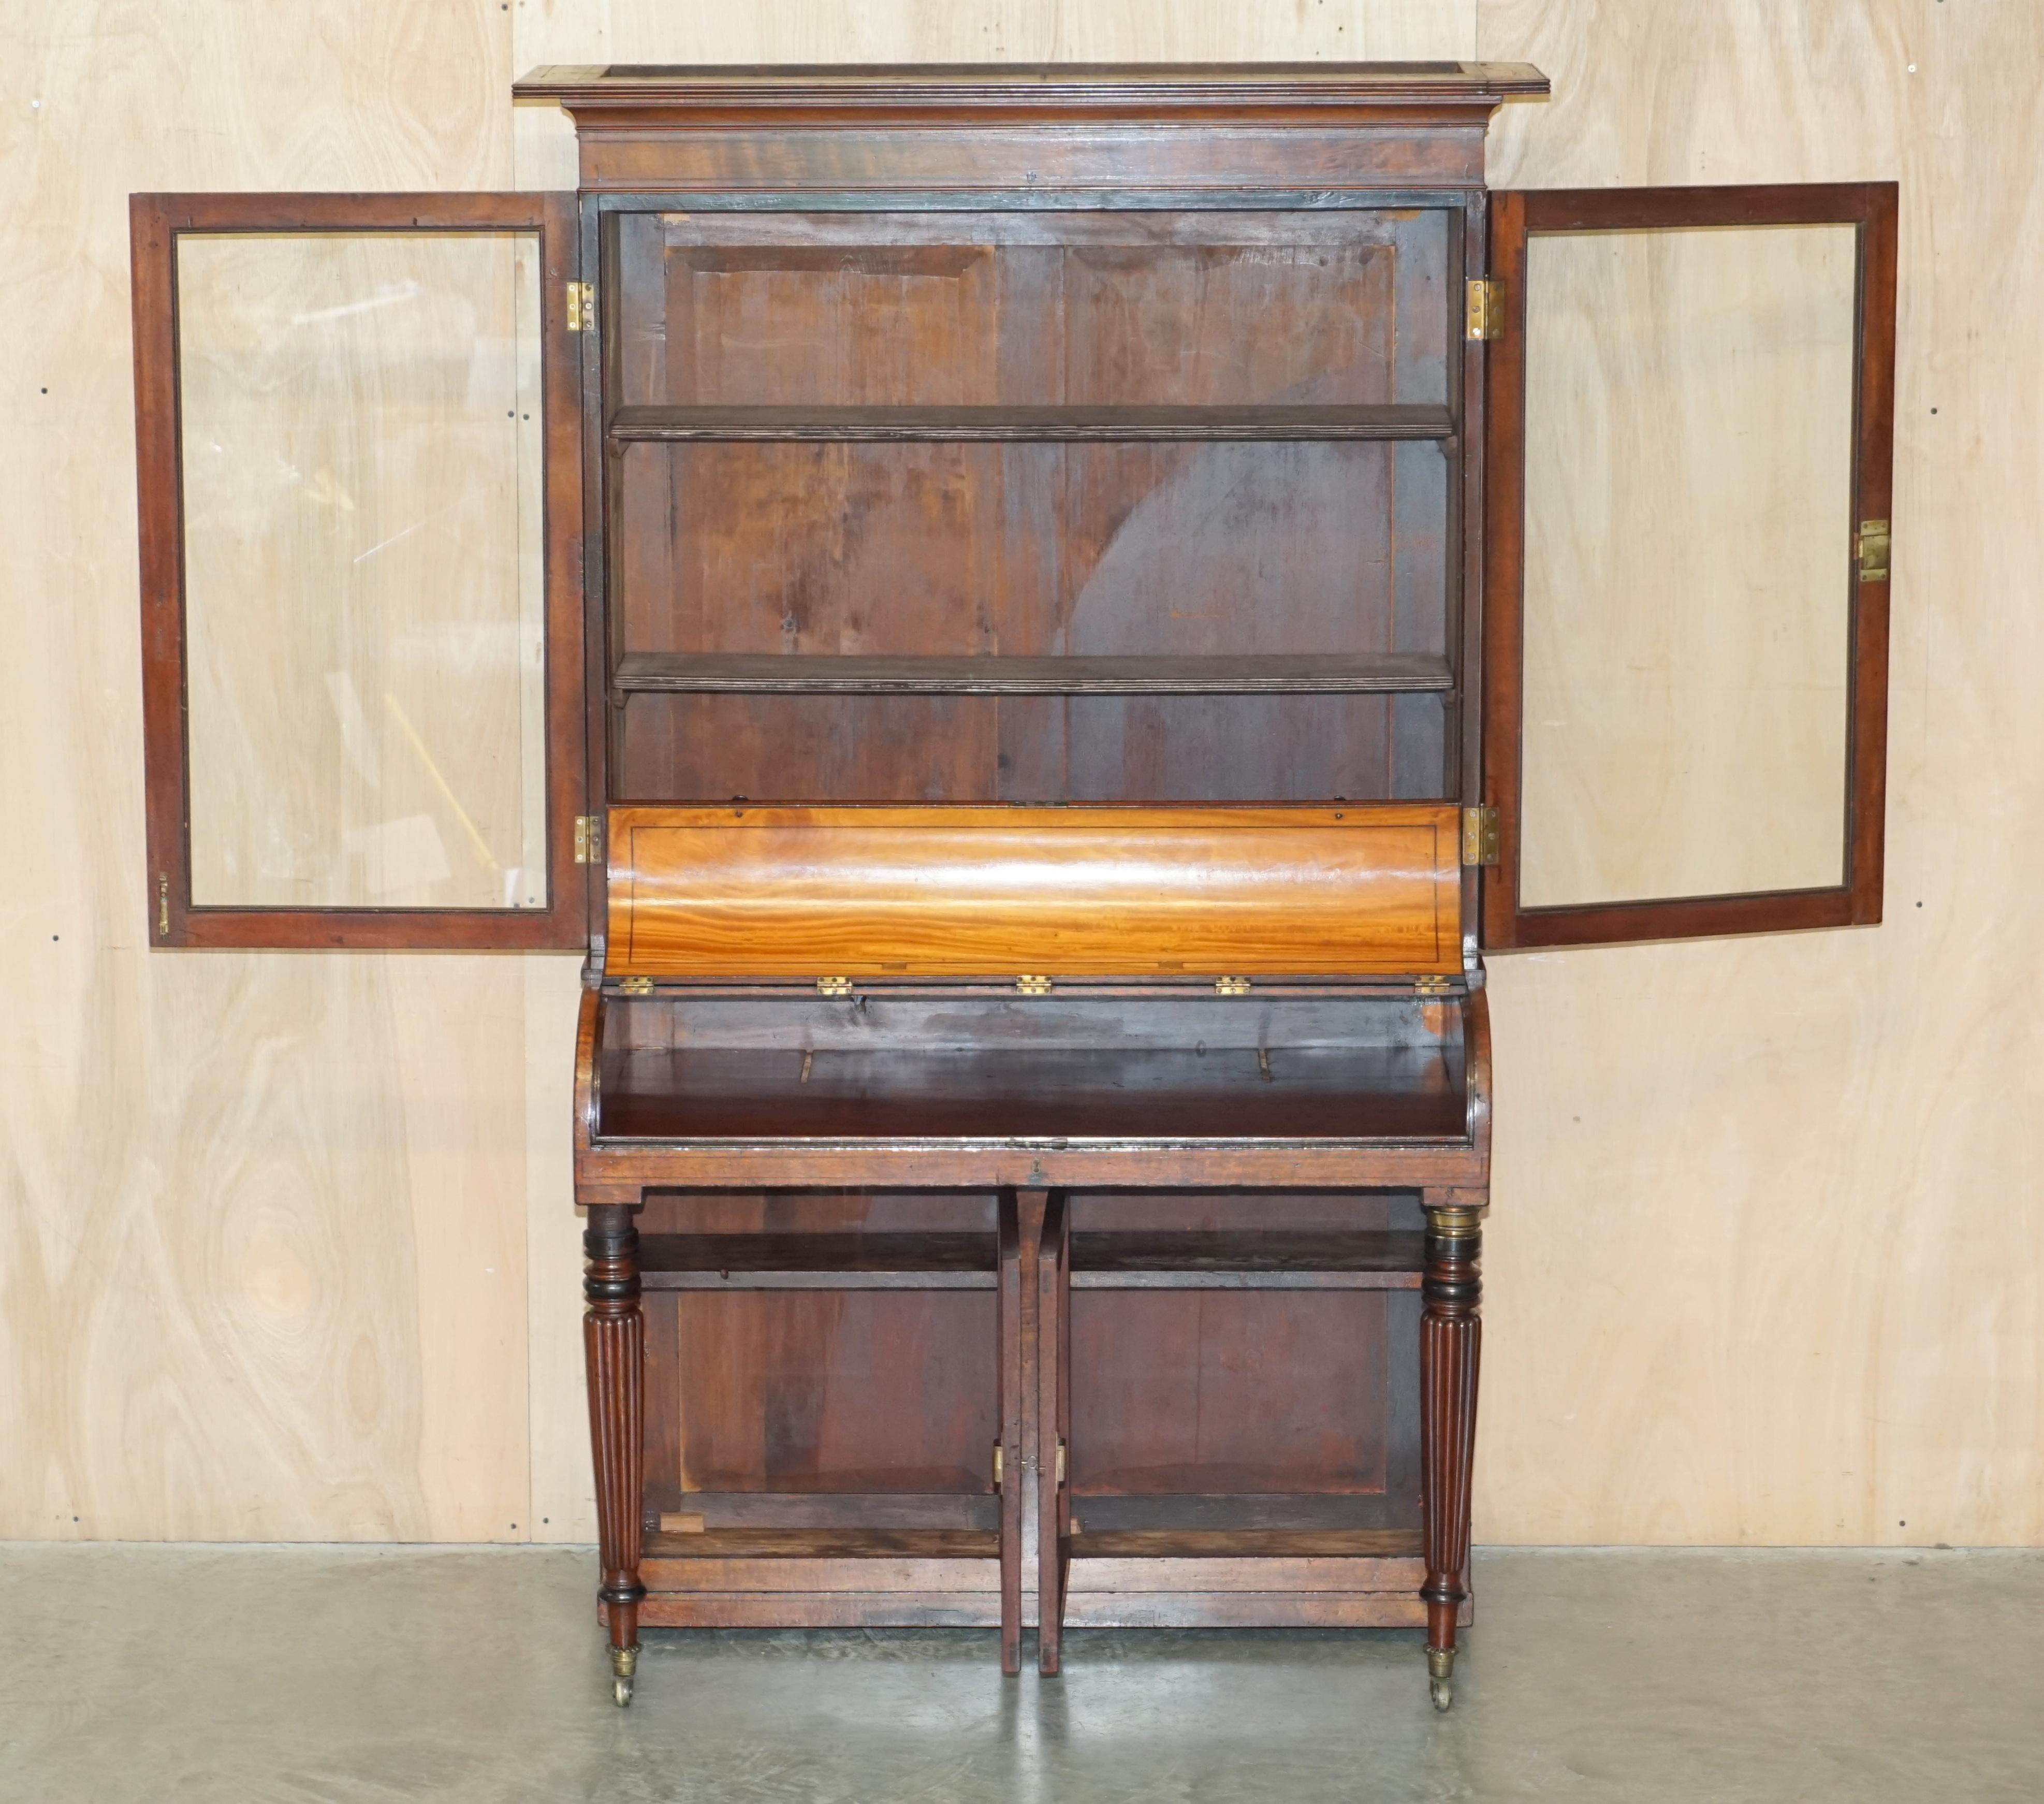 ANTIQUE ViCTORIAN 1860 WALNUT SCRIBAN BUREAU BOOKCASE MUST SEE PICTURES For Sale 7